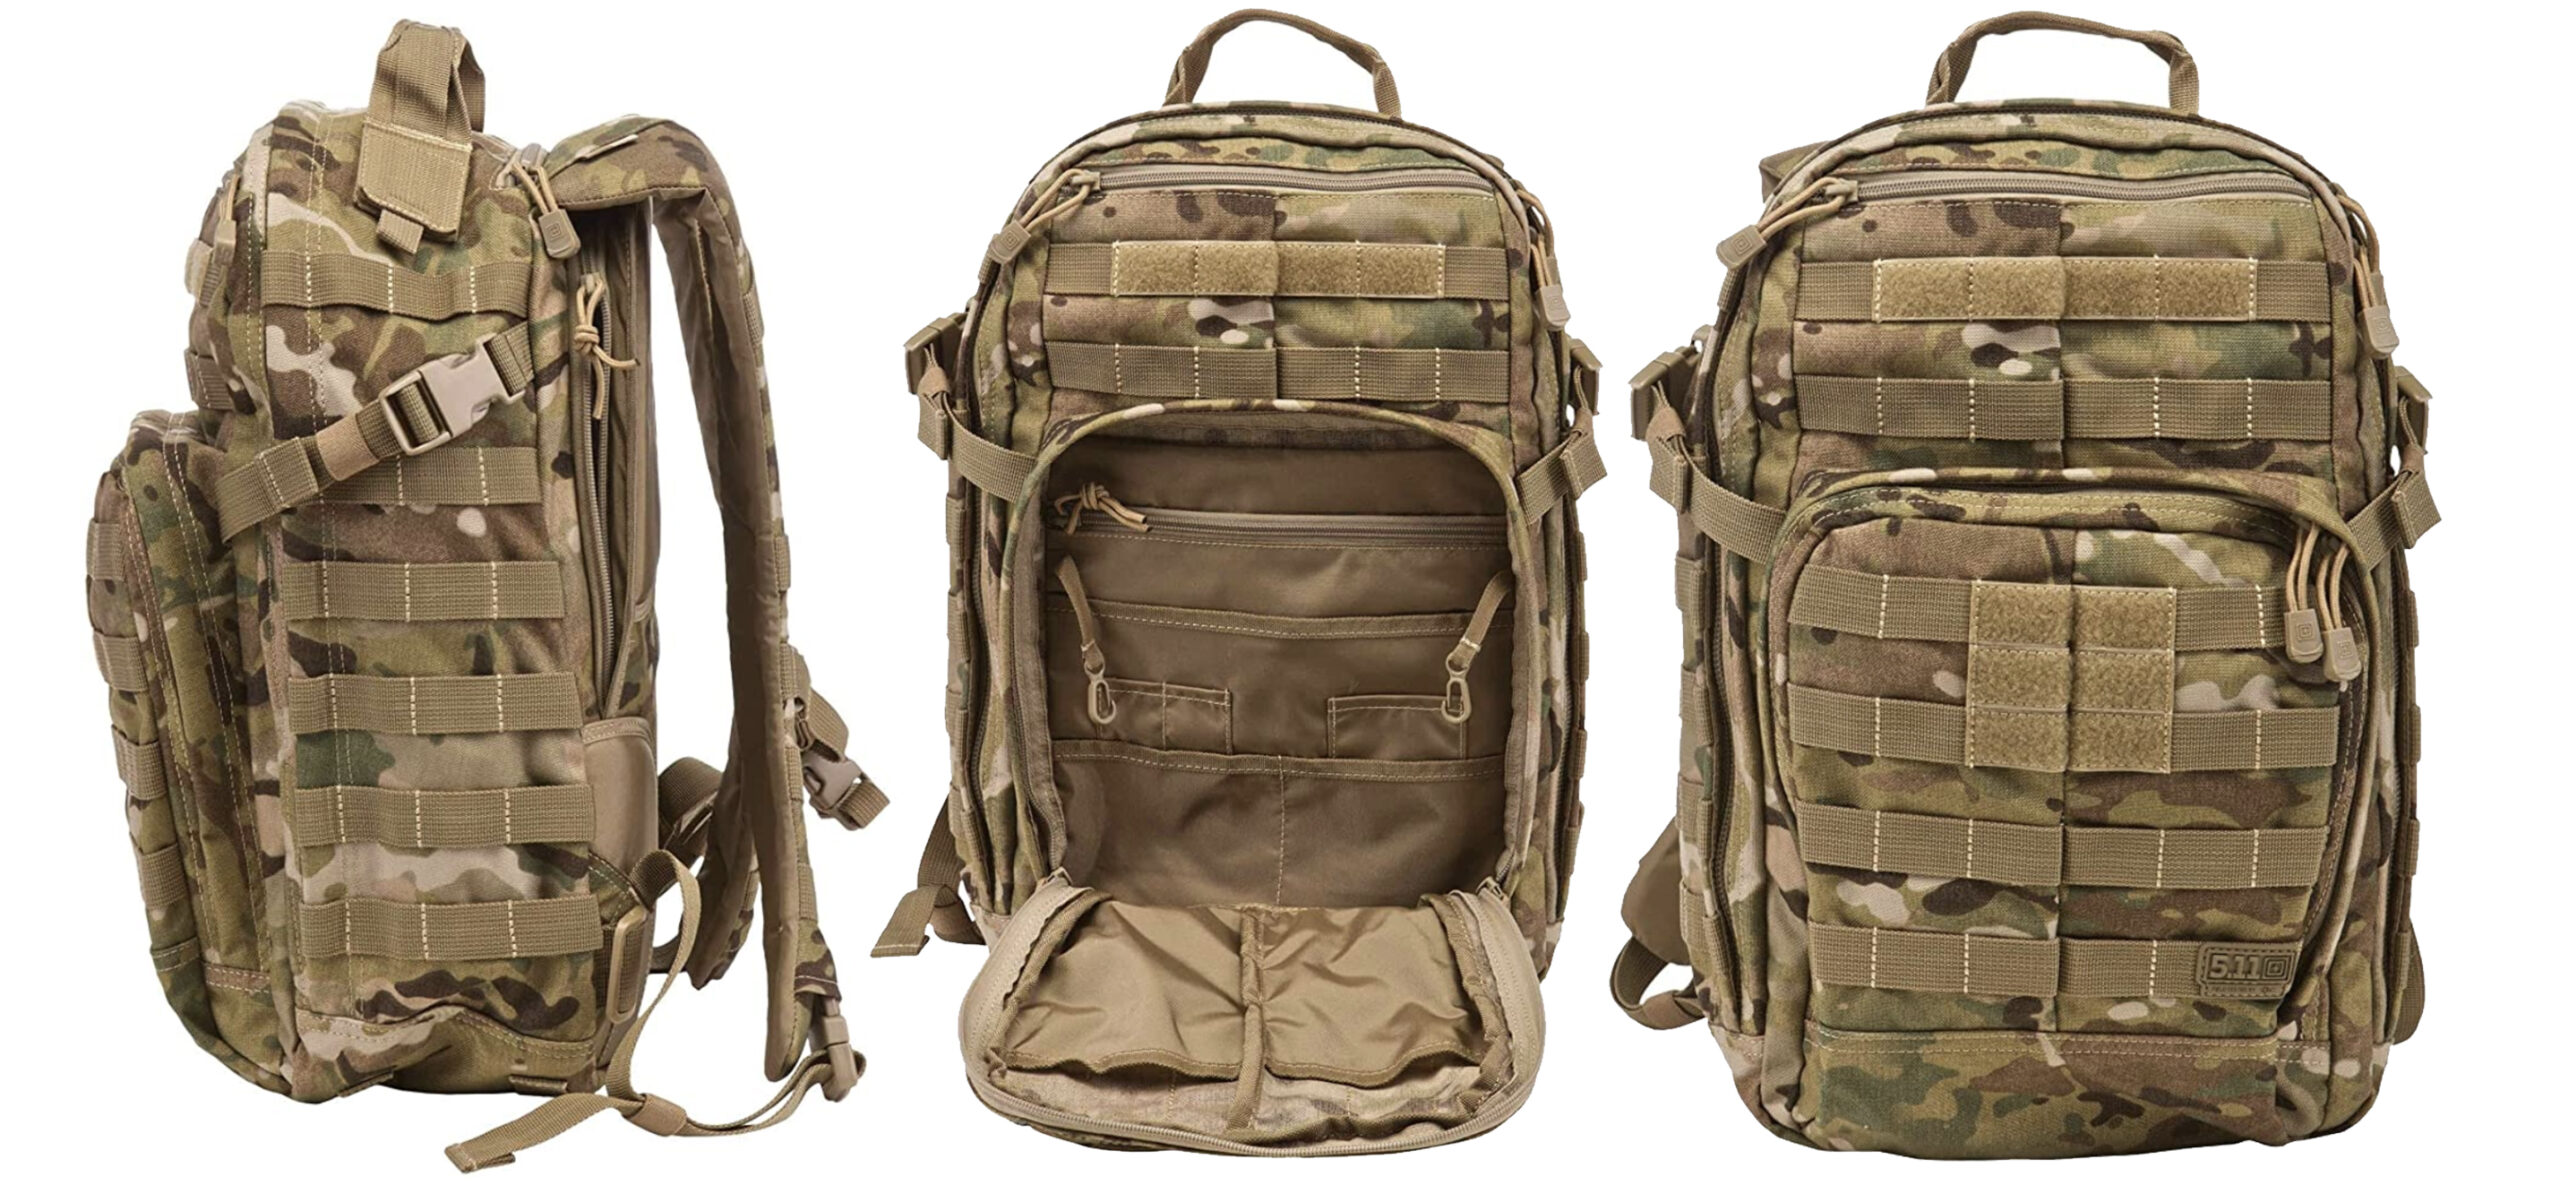 A camo and tan backpack with MOLLE webbing on a white background.